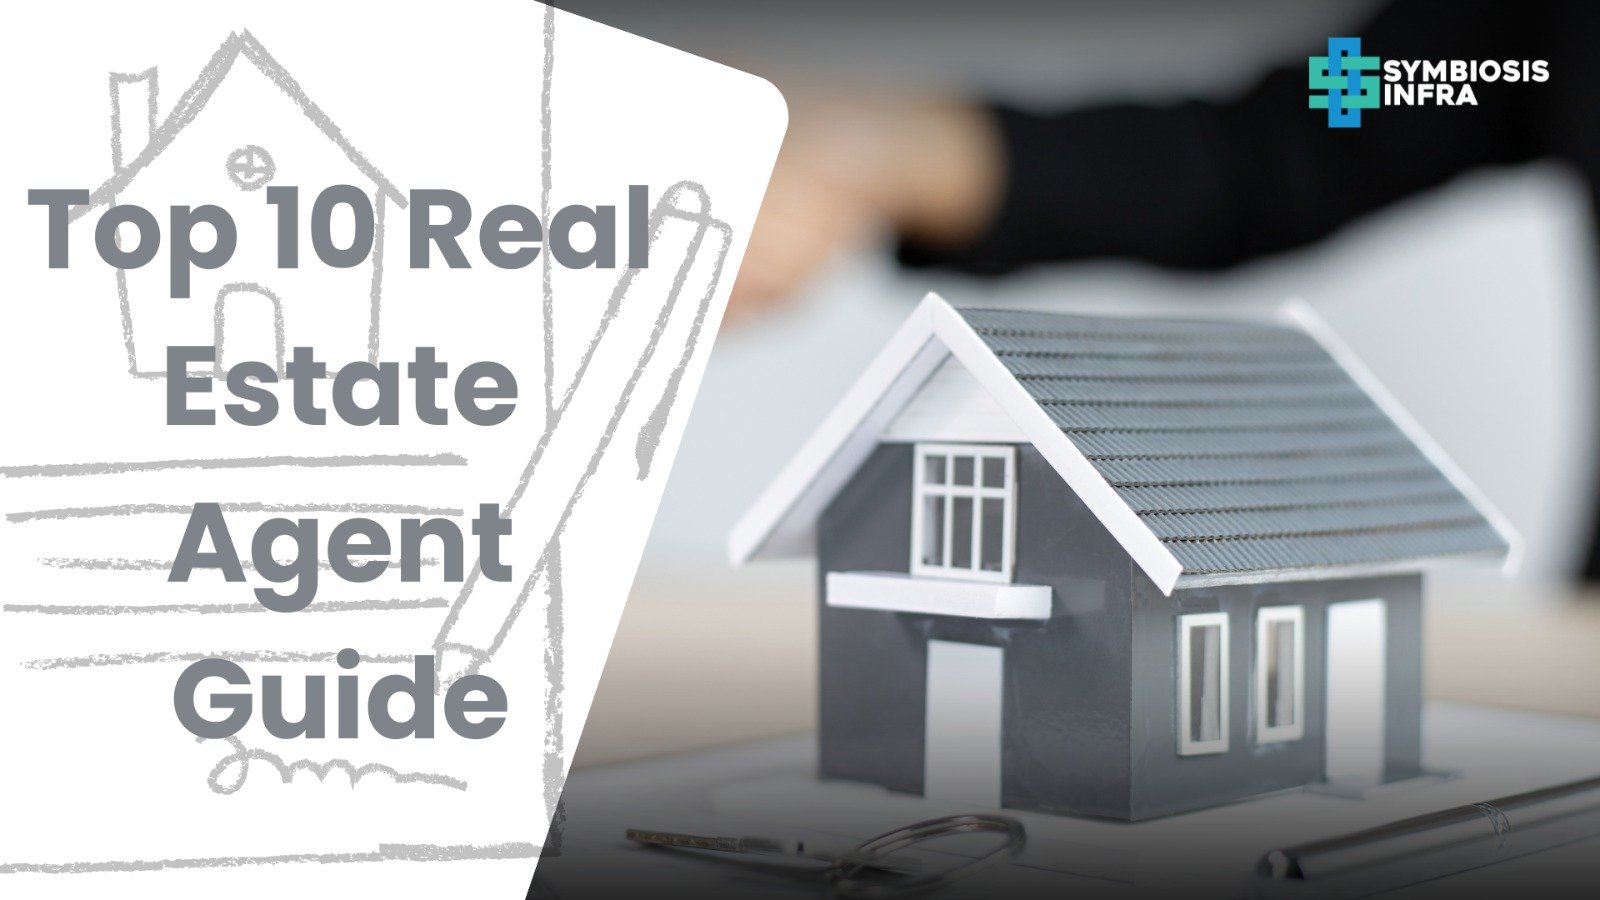 Top Real Estate Agent Guide